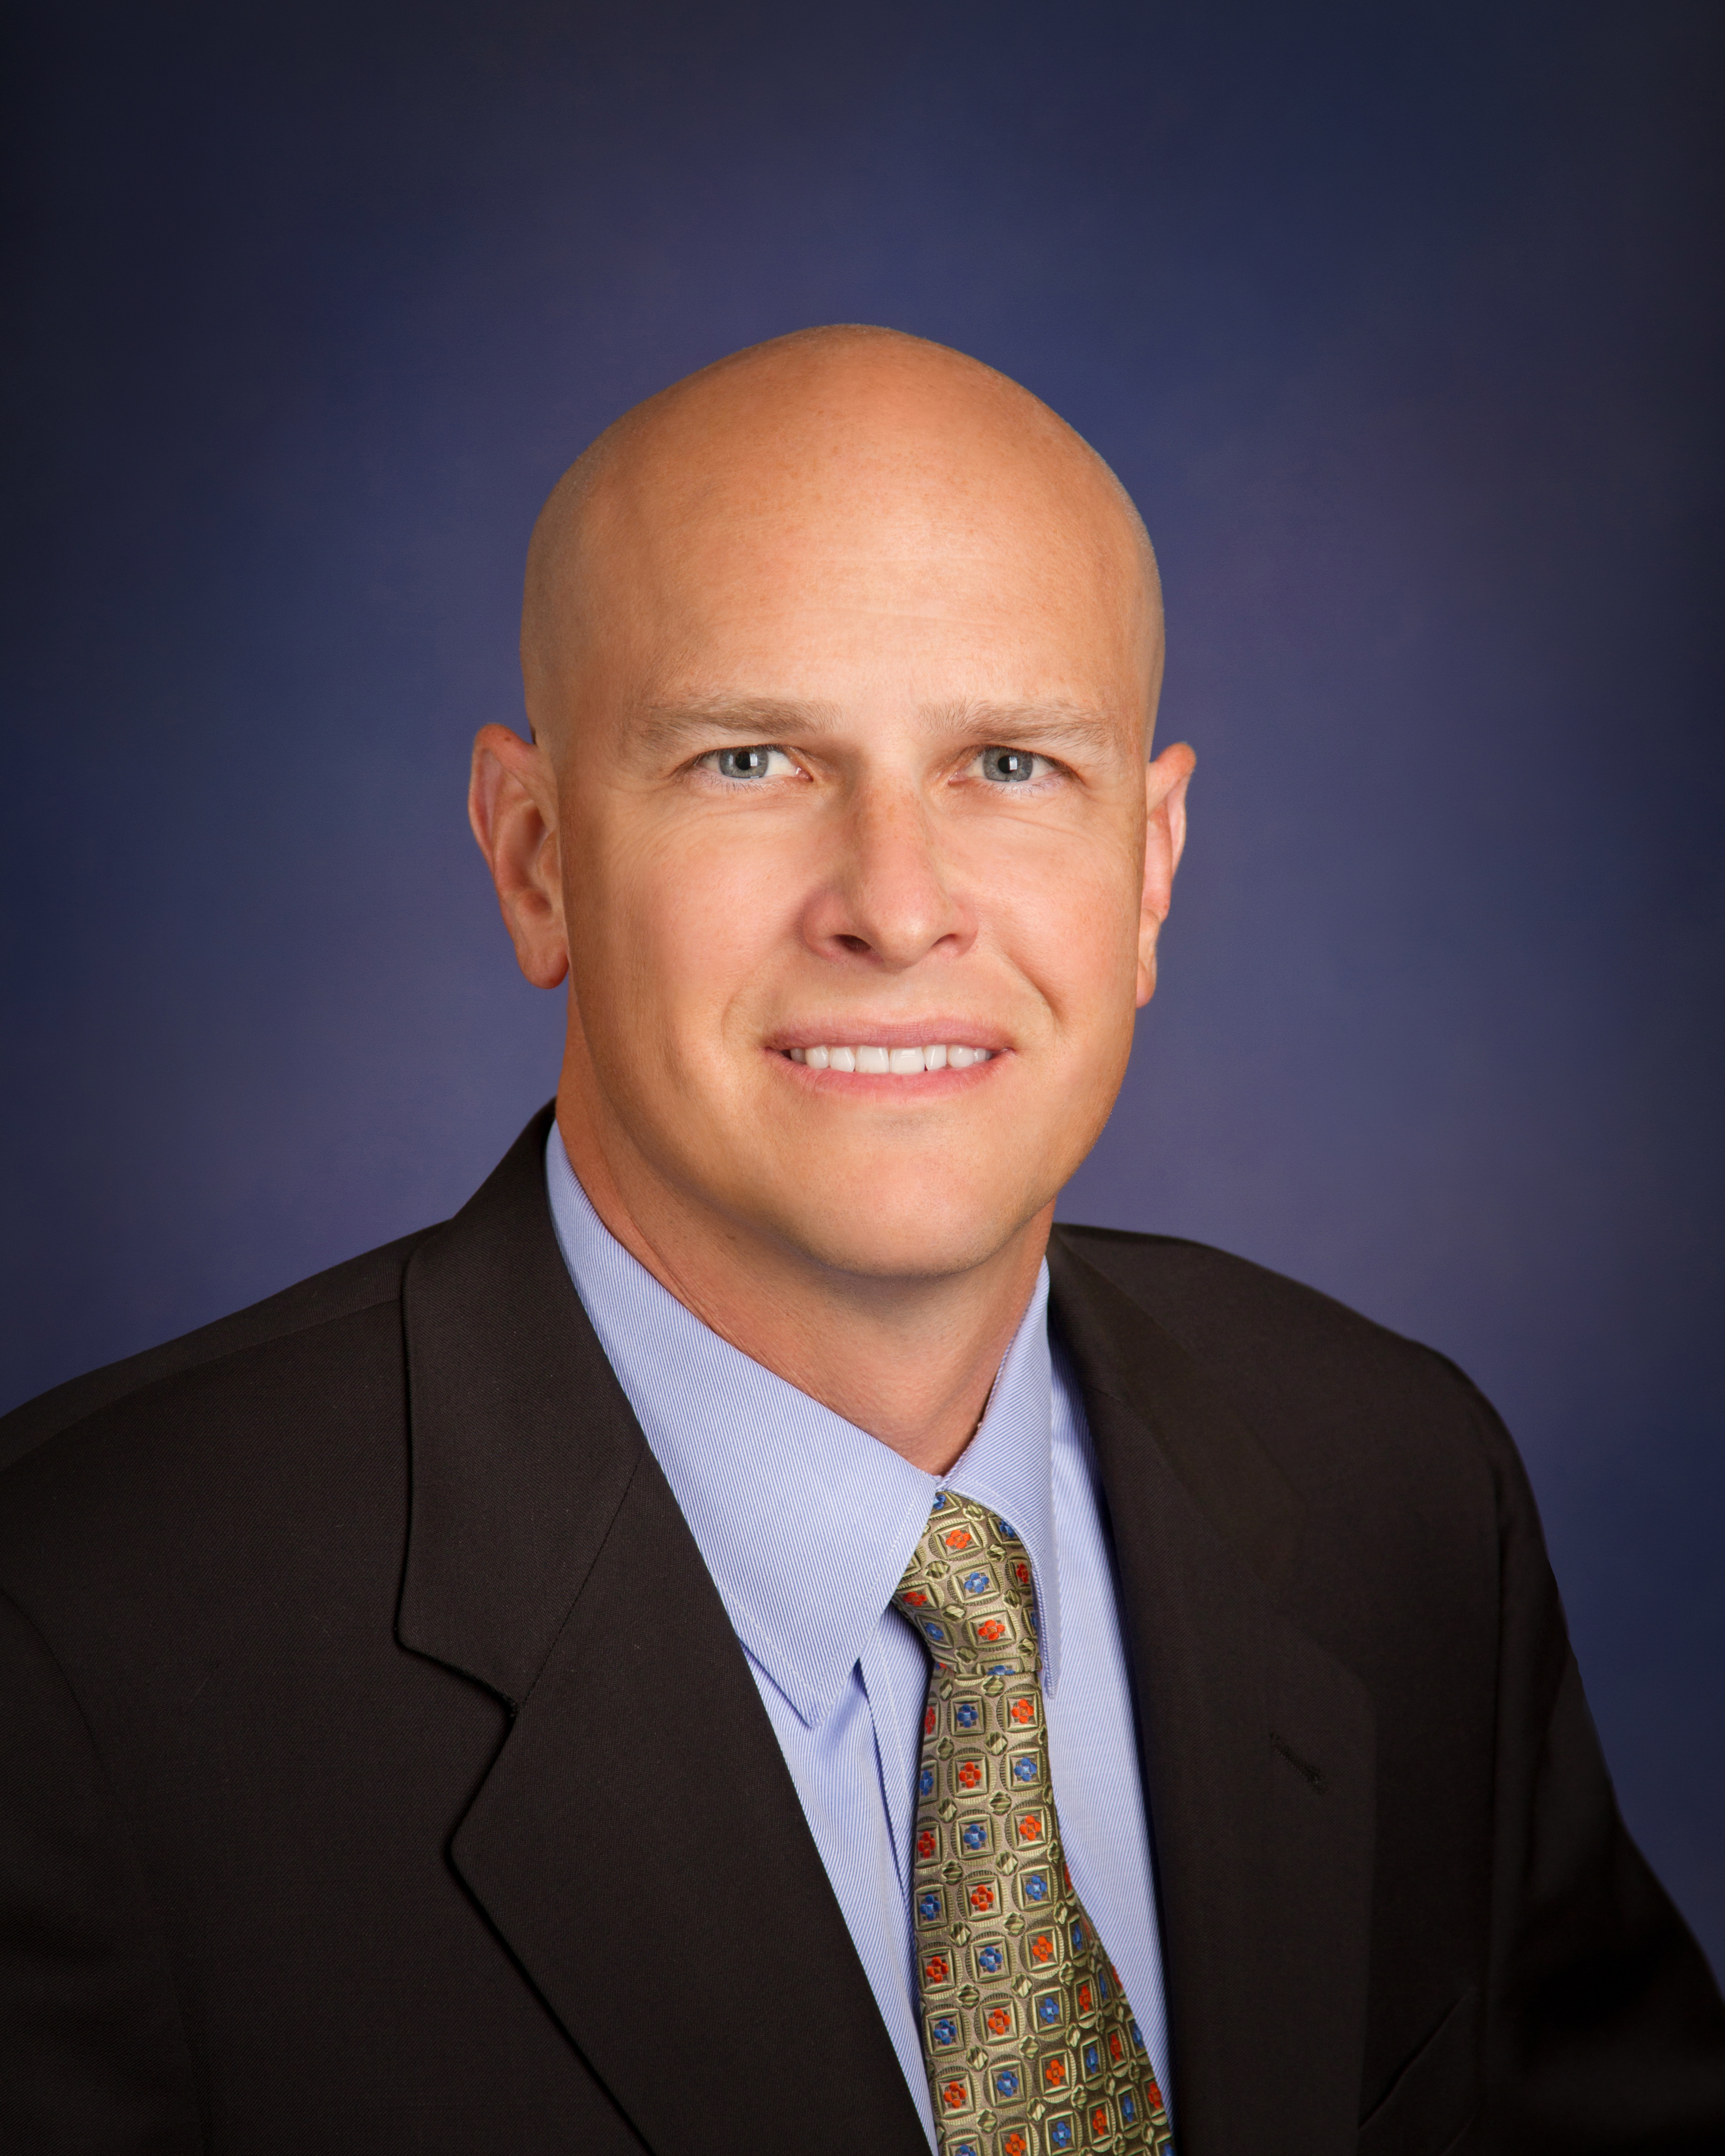 Paul A. Cook, General Manager of Irvine Ranch Water District